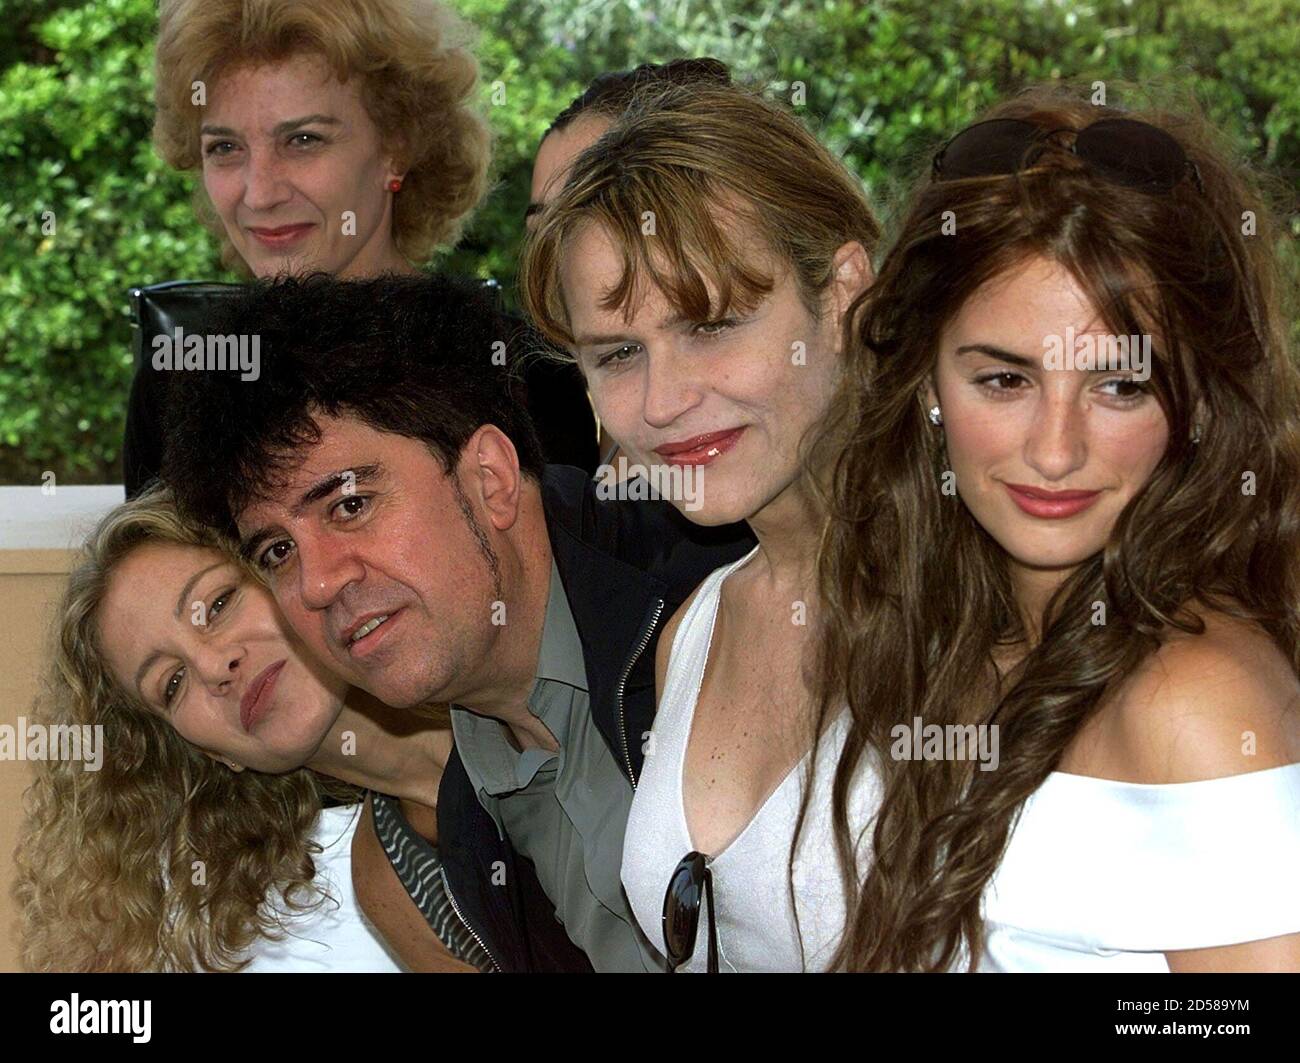 Spanish director Pedro Almodovar (2rd L) leans forward with actress Cecilia Roth (L) during a photocall with members of the cast, from L-R: Marisa Paredes, Candela Pena (hidden), Antonia San Juan, and Penelope Cruz May 15. Almodovar and his cast present their film 'Todo Sobre Mi Madre'  which will be screened in competition  at the 52nd Cannes Film Festival.         ??» Stock Photo